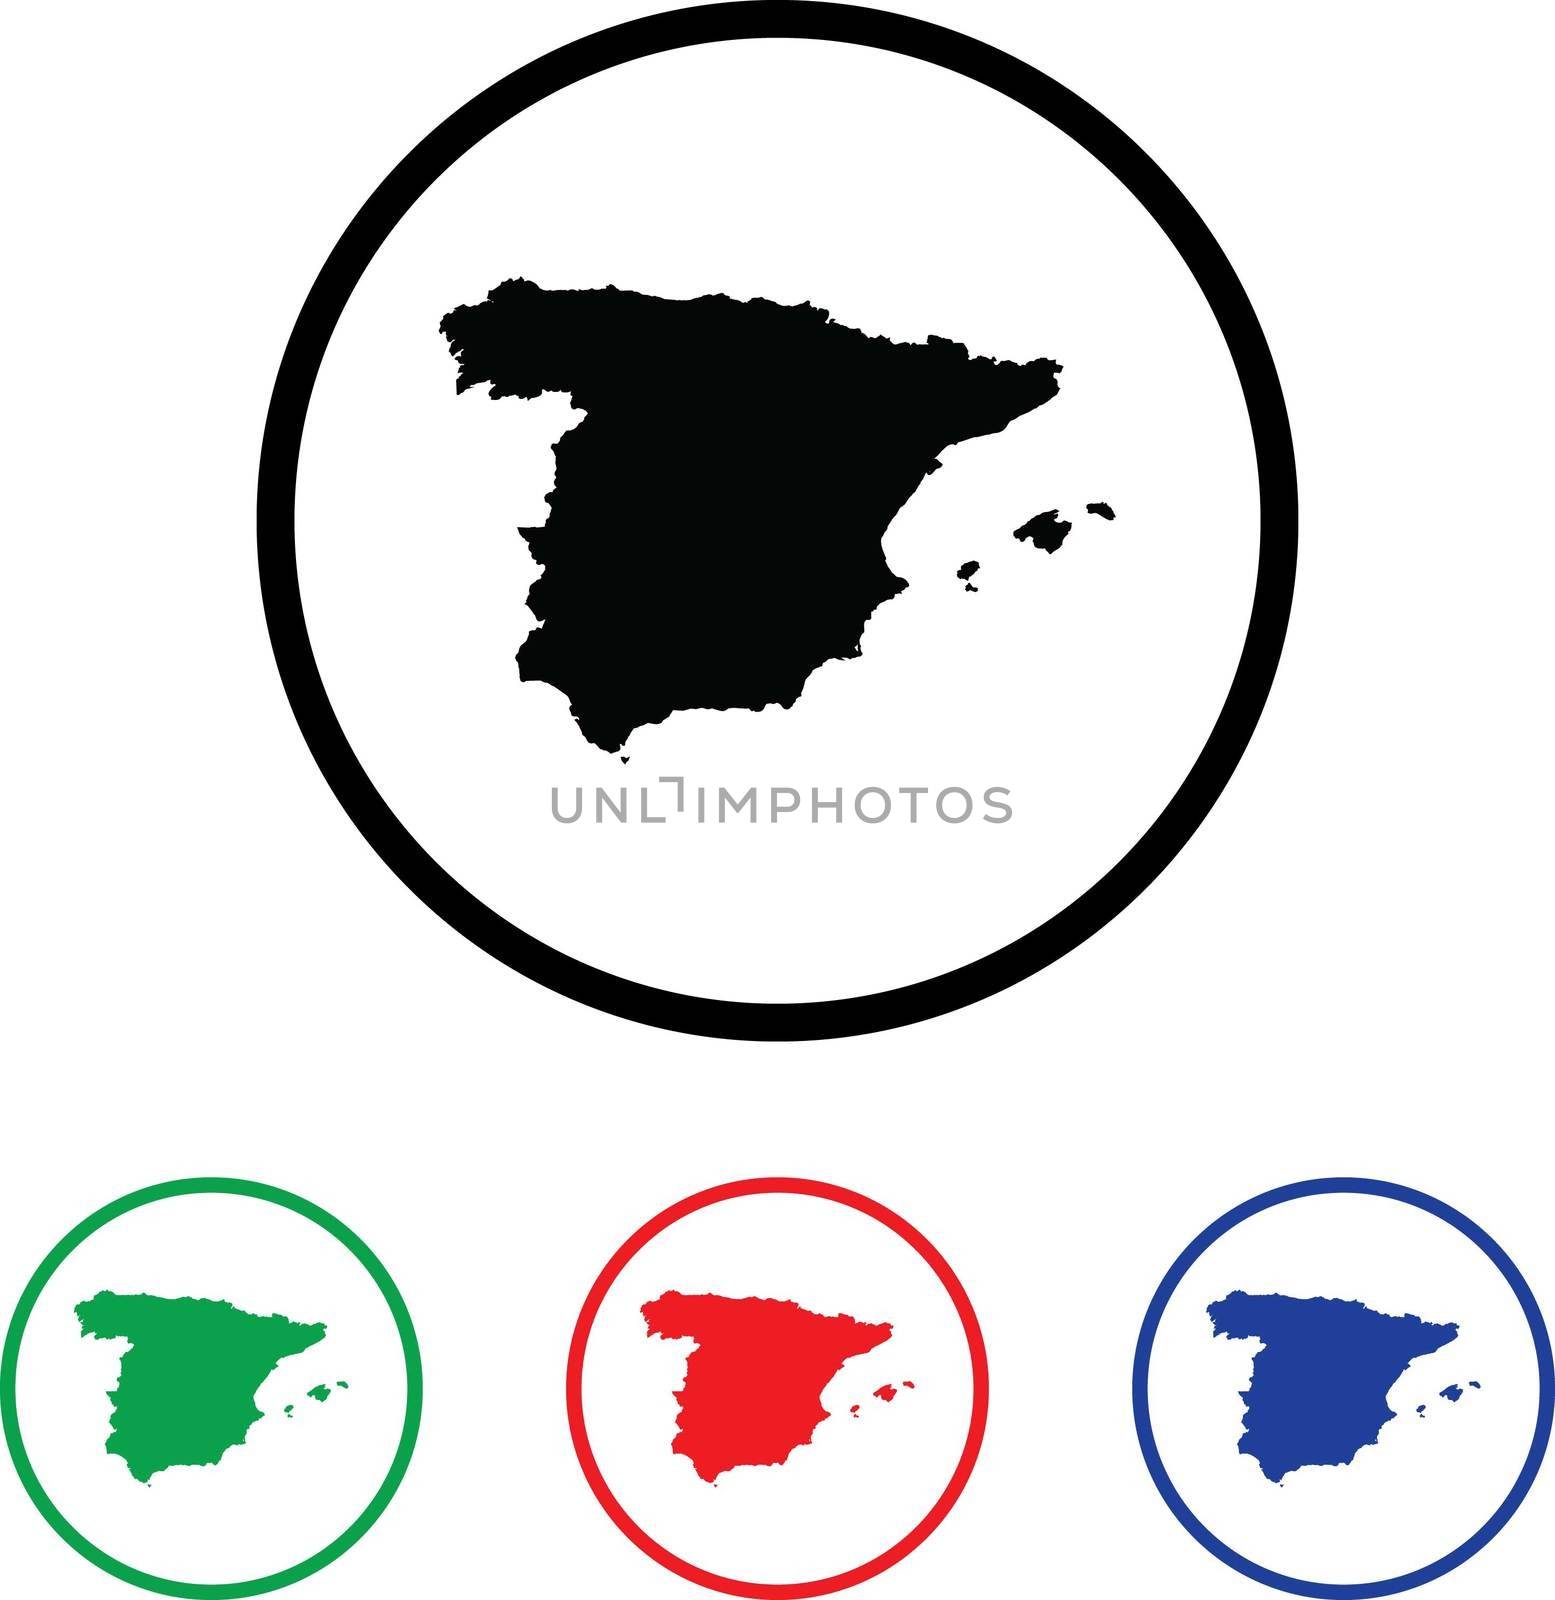 Spain Icon Illustration with Four Color Variations